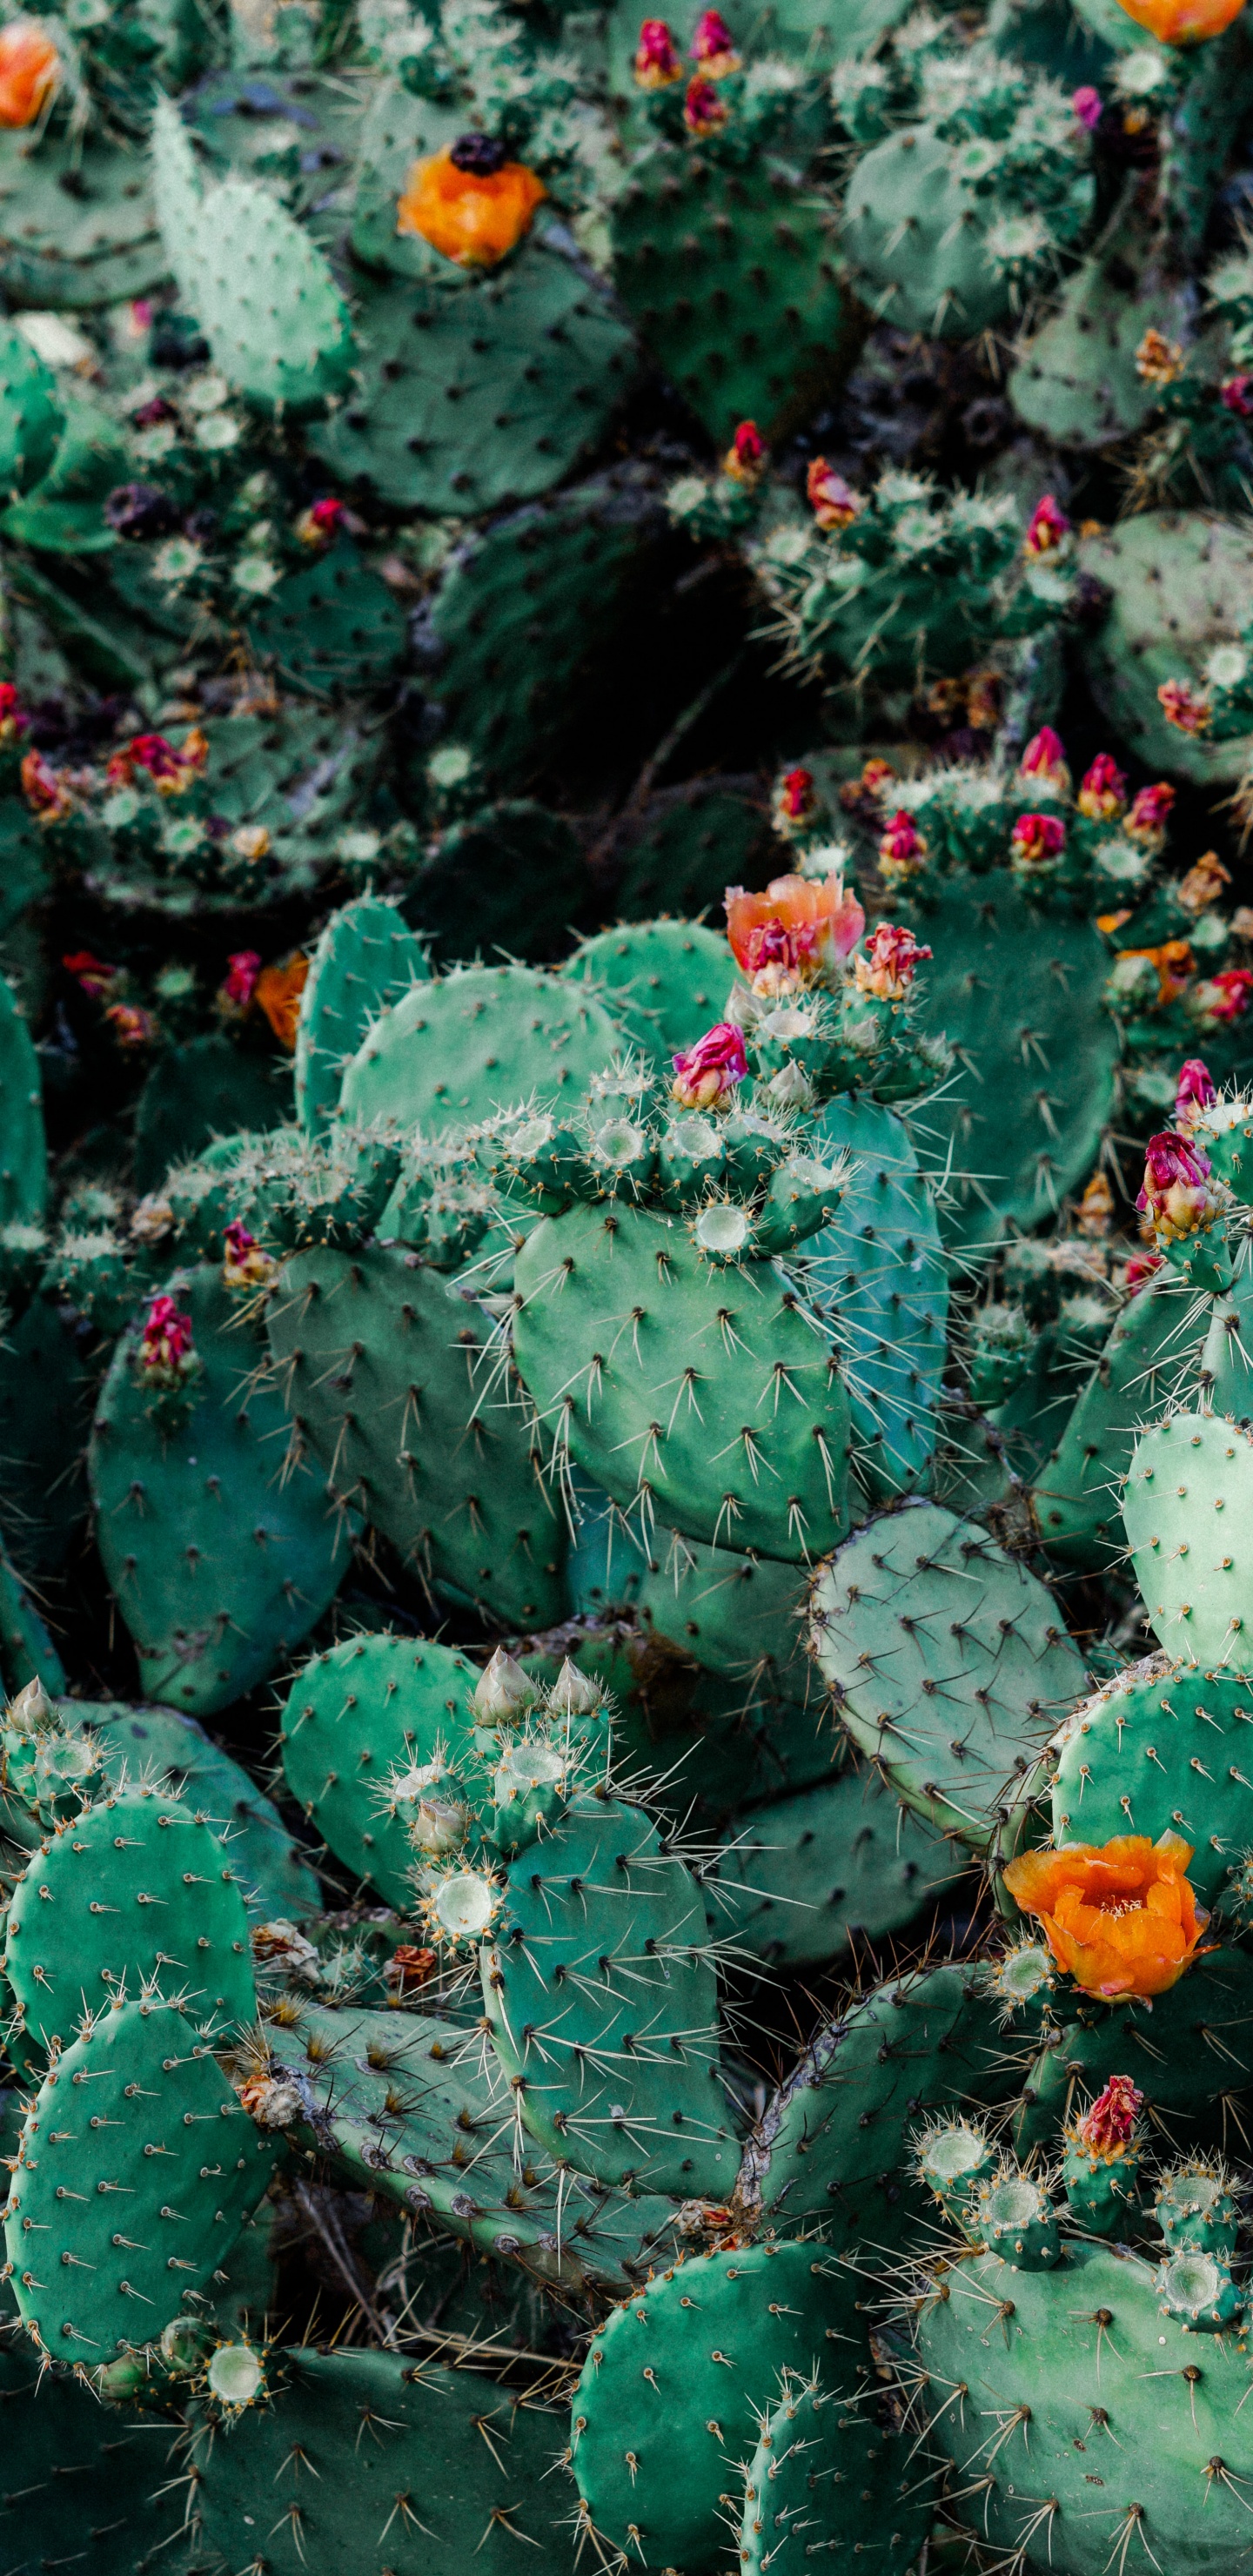 Green Cactus With Red Flowers. Wallpaper in 1440x2960 Resolution